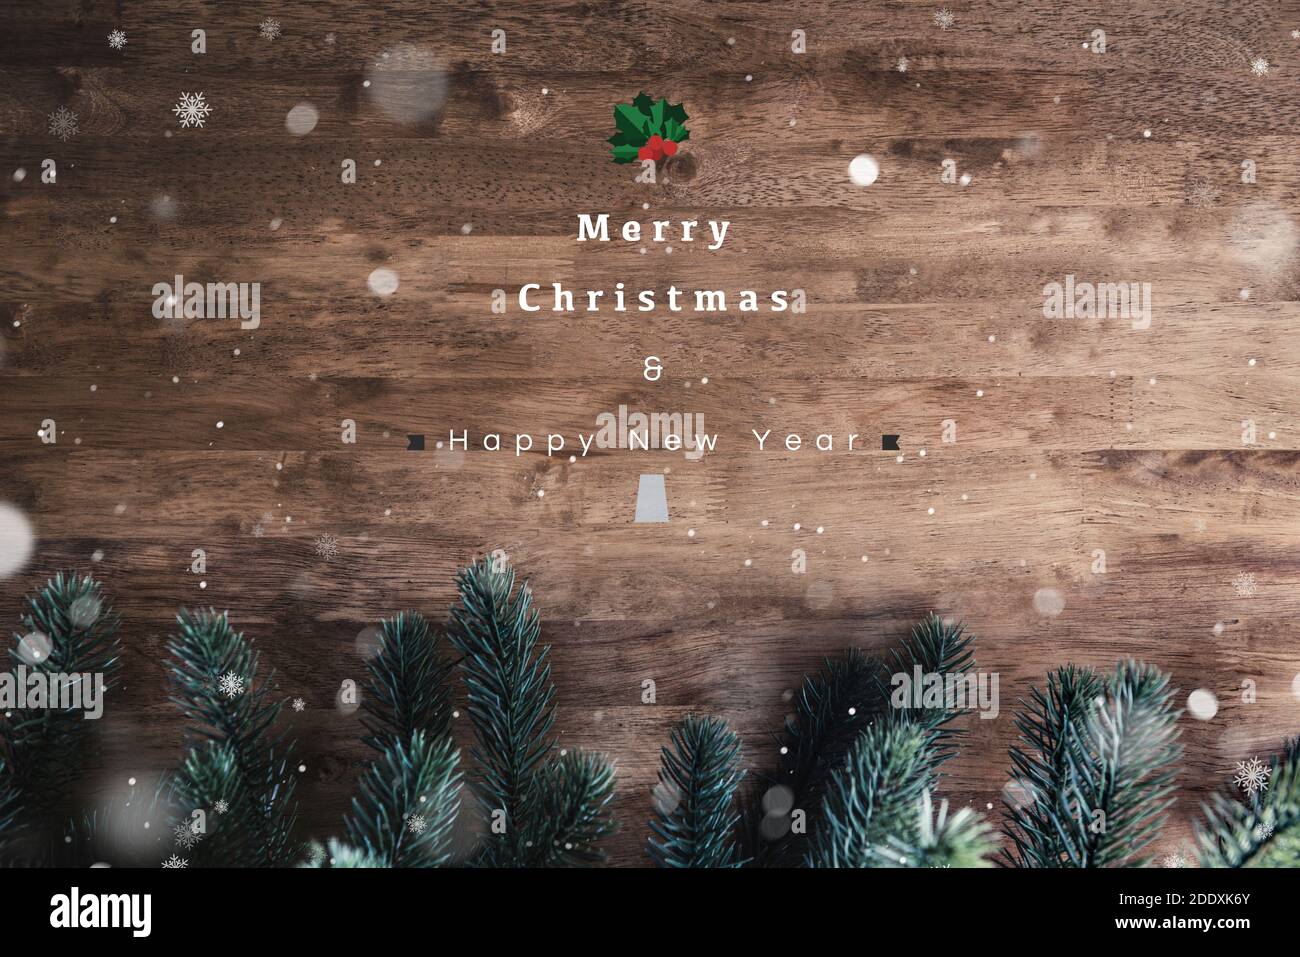 Merry Christmas and Happy New Year text on wood table background with snow and green pine tree leaf decorations, top view Stock Photo